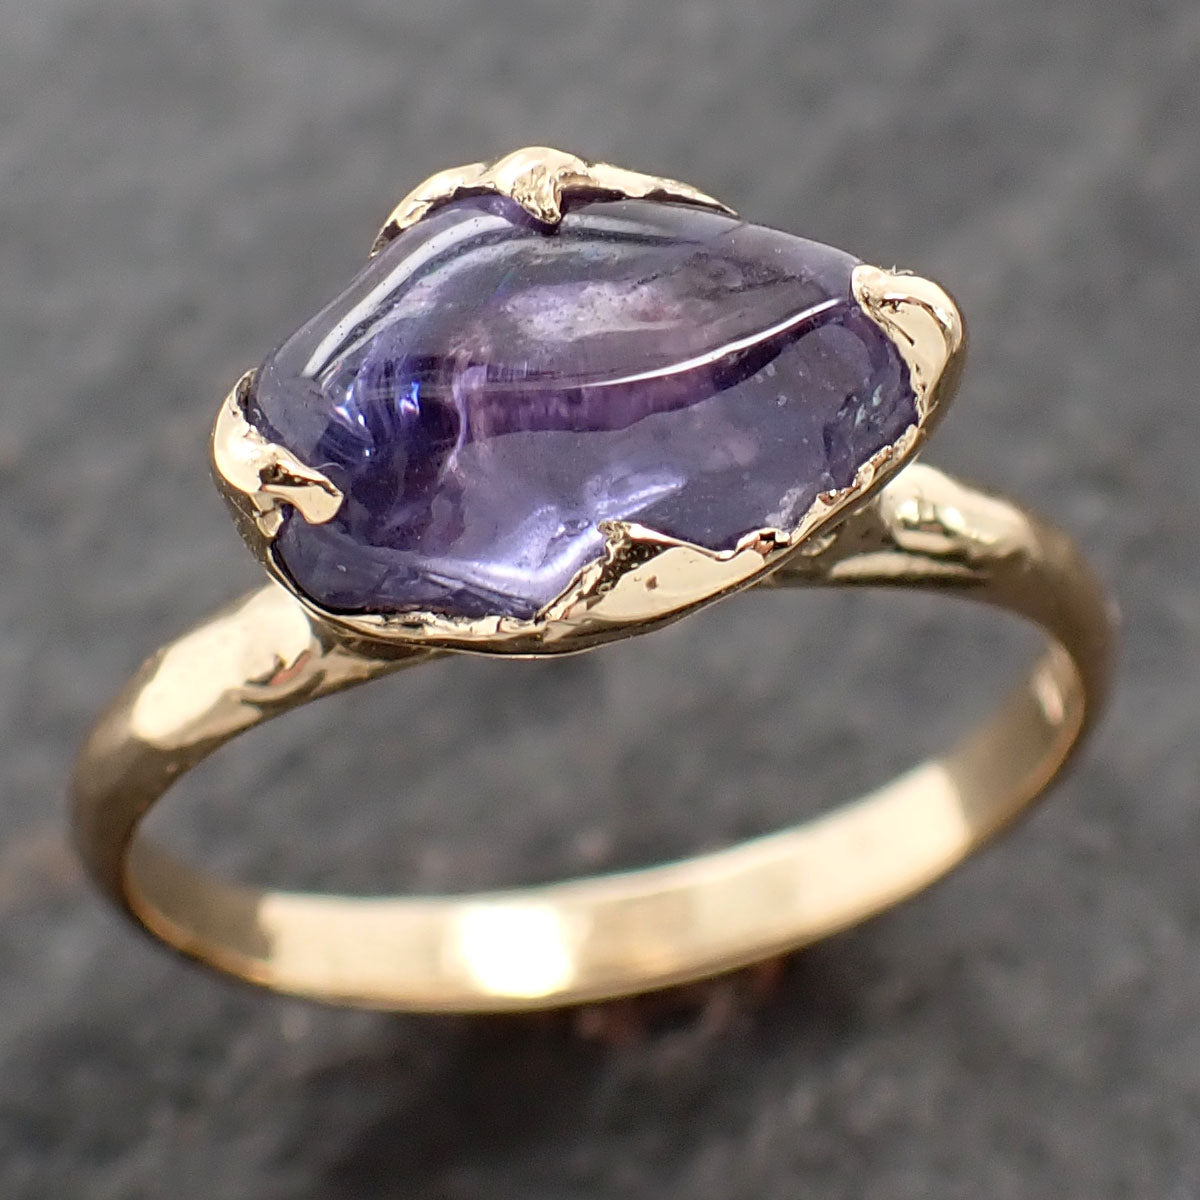 Sapphire Pebble candy purple violet polished 18k yellow gold Solitaire gemstone ring 2632